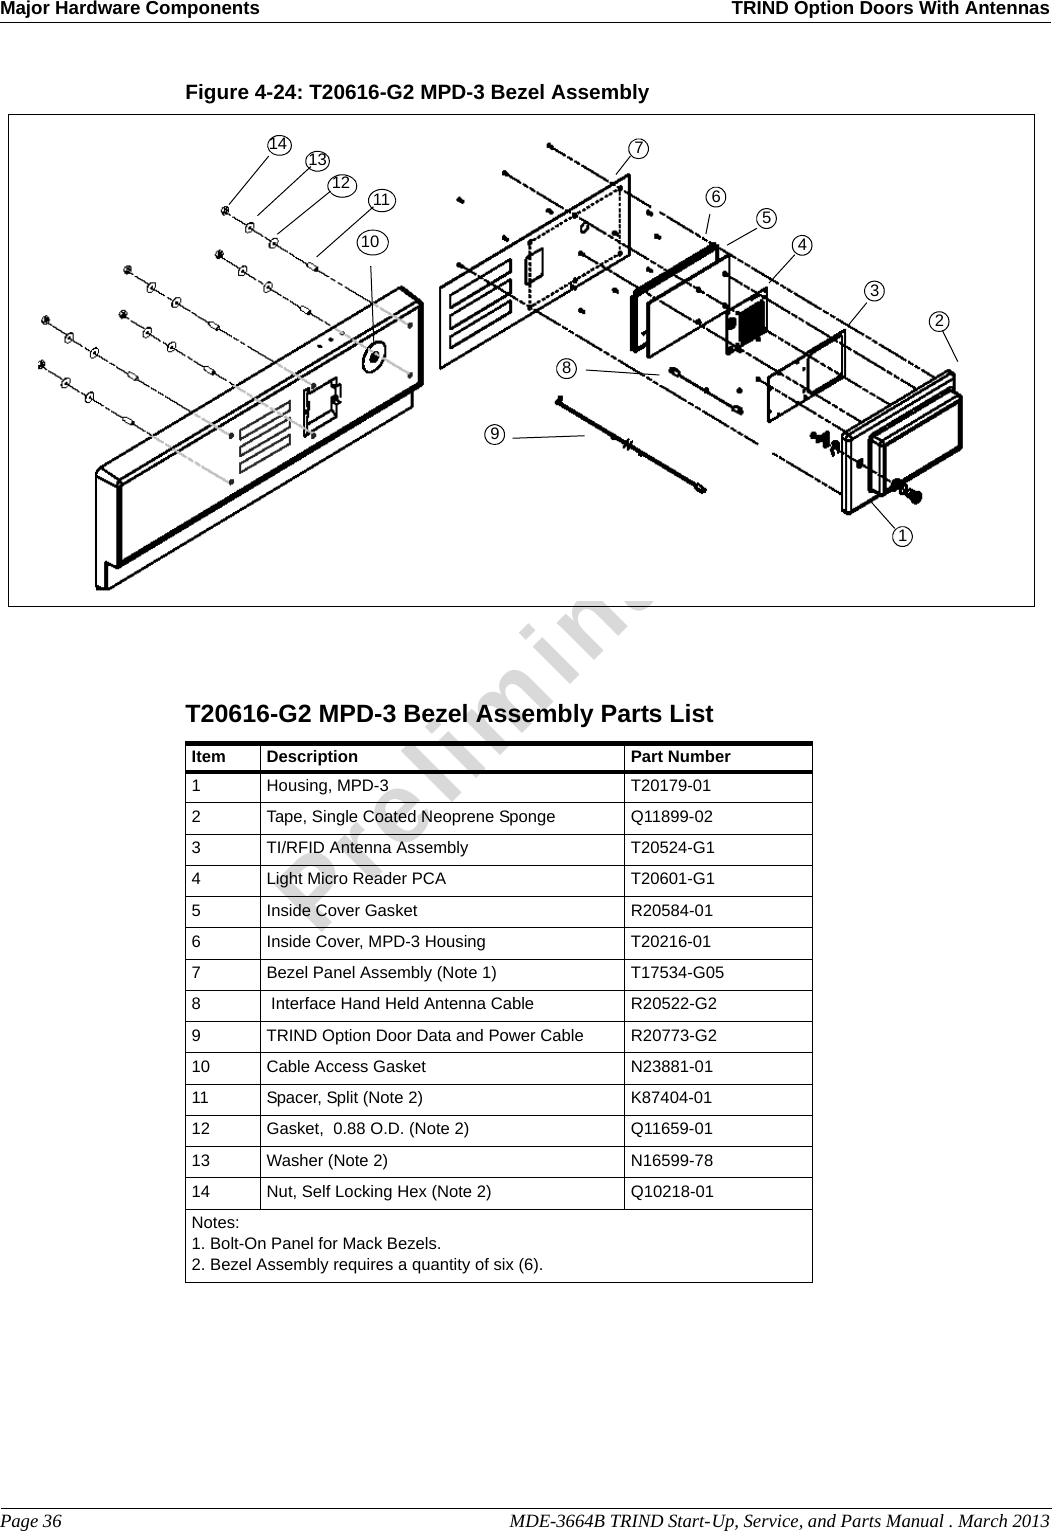 Major Hardware Components TRIND Option Doors With AntennasPage 36                                                                                                  MDE-3664B TRIND Start-Up, Service, and Parts Manual . March 2013PreliminaryFigure 4-24: T20616-G2 MPD-3 Bezel Assembly7510643189211131214 T20616-G2 MPD-3 Bezel Assembly Parts List Item Description Part Number1Housing, MPD-3 T20179-012Tape, Single Coated Neoprene Sponge Q11899-023TI/RFID Antenna Assembly T20524-G14Light Micro Reader PCA T20601-G15Inside Cover Gasket R20584-016Inside Cover, MPD-3 Housing T20216-017Bezel Panel Assembly (Note 1) T17534-G058 Interface Hand Held Antenna Cable R20522-G29TRIND Option Door Data and Power Cable R20773-G210 Cable Access Gasket N23881-0111 Spacer, Split (Note 2) K87404-0112 Gasket,  0.88 O.D. (Note 2) Q11659-0113 Washer (Note 2) N16599-7814 Nut, Self Locking Hex (Note 2) Q10218-01Notes:1. Bolt-On Panel for Mack Bezels.2. Bezel Assembly requires a quantity of six (6).